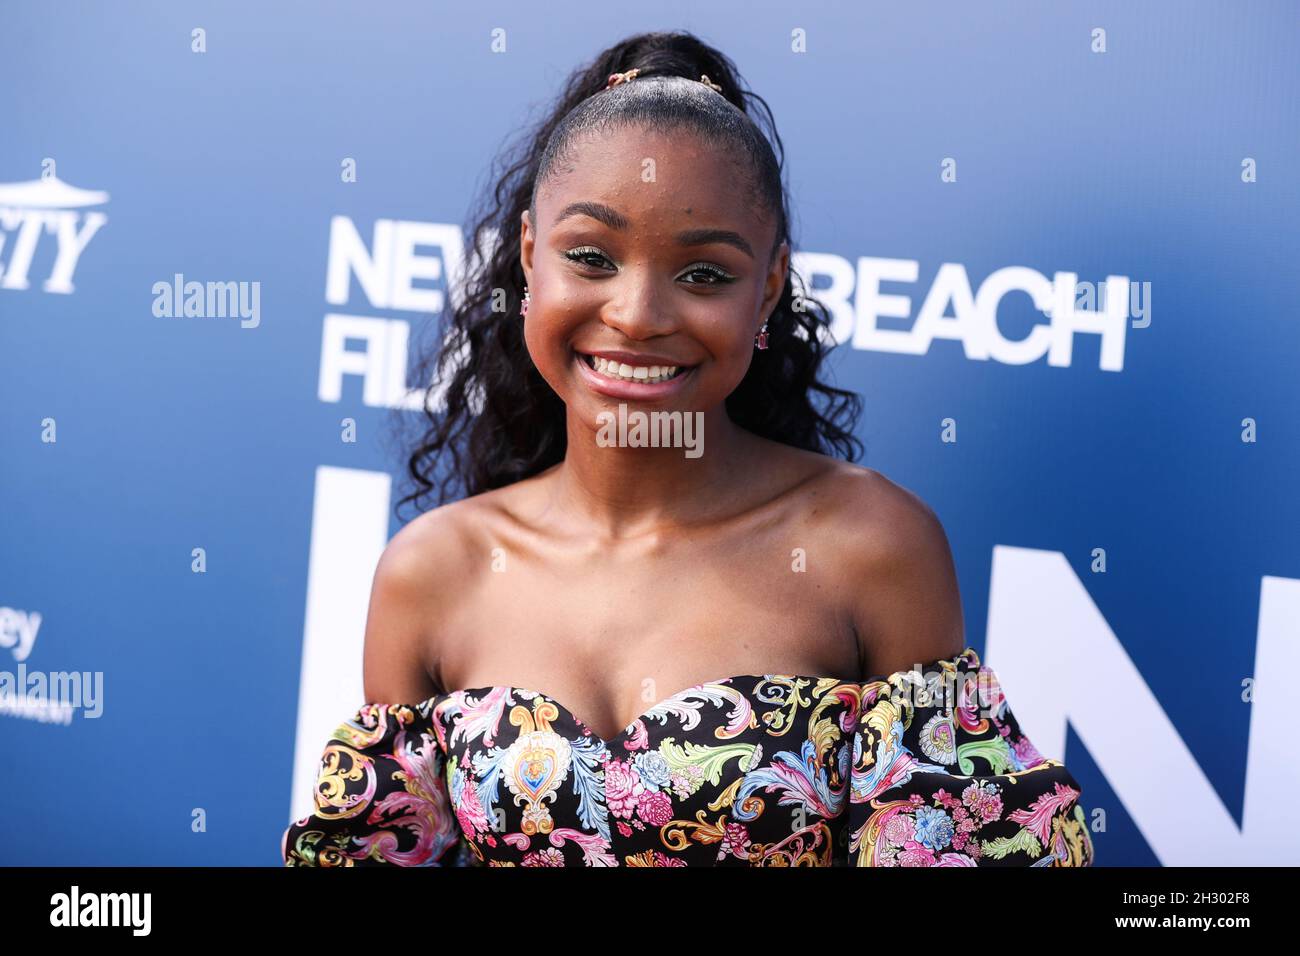 NEWPORT BEACH, ORANGE COUNTY, CALIFORNIA, USA - OCTOBER 24: Actress Moses  Ingram arrives at the 22nd Annual Newport Beach Film Festival - Festival  Honors And Variety's 10 Actors To Watch held at